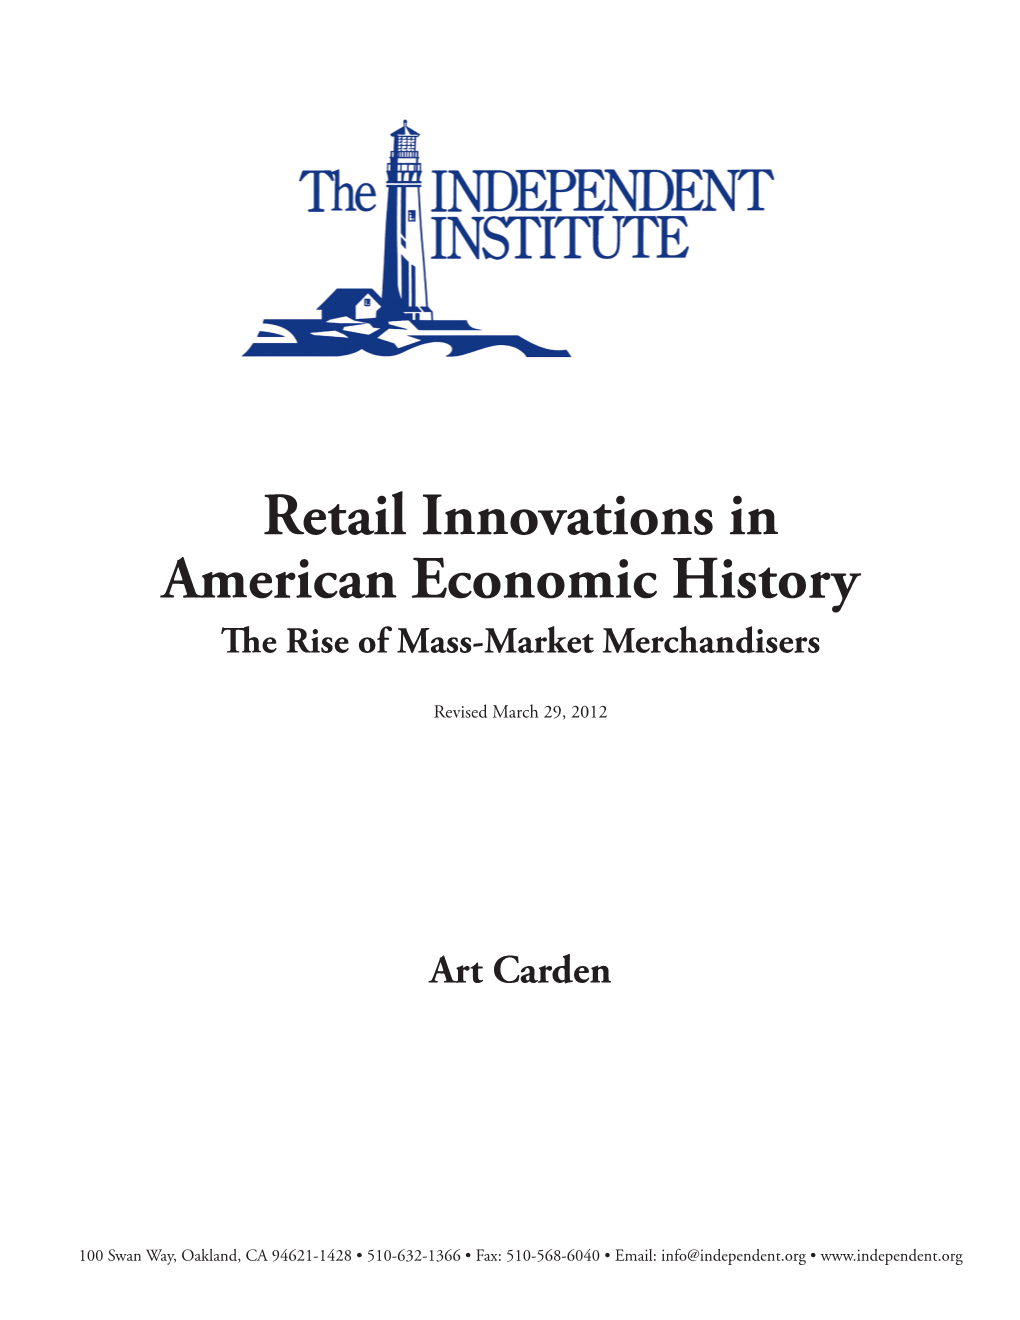 Retail Innovations in American Economic History the Rise of Mass-Market Merchandisers